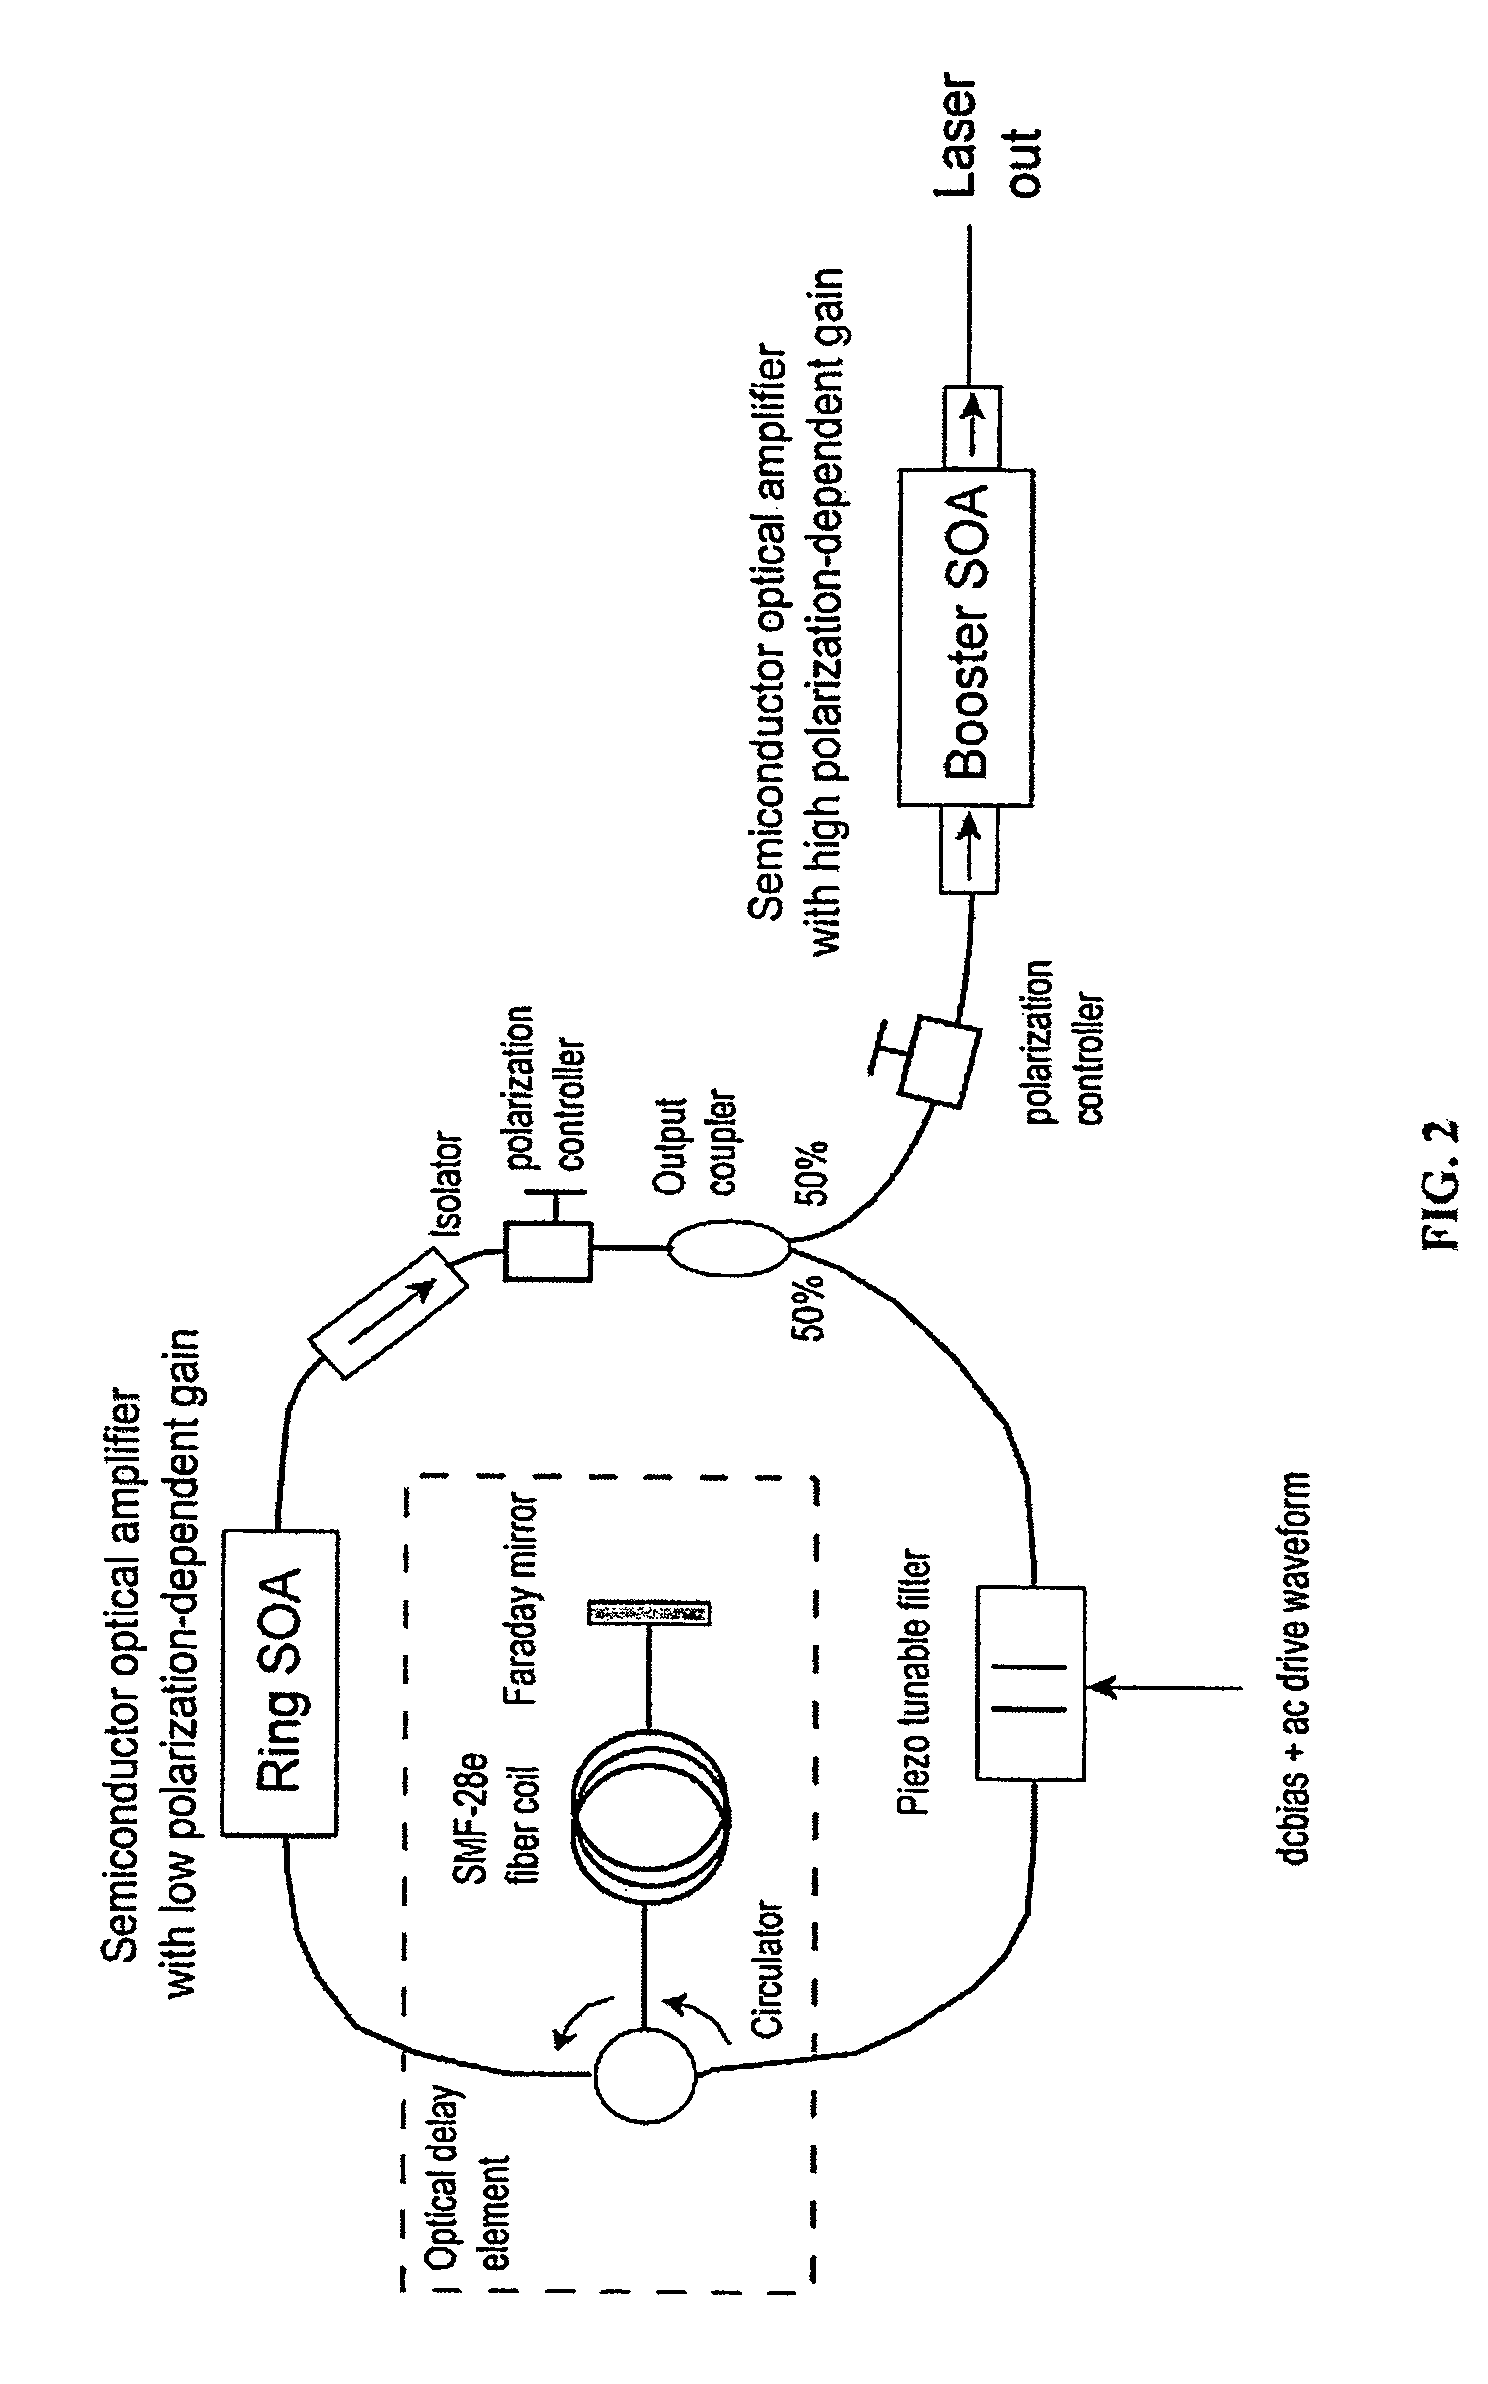 Methods and apparatus for swept-source optical coherence tomography